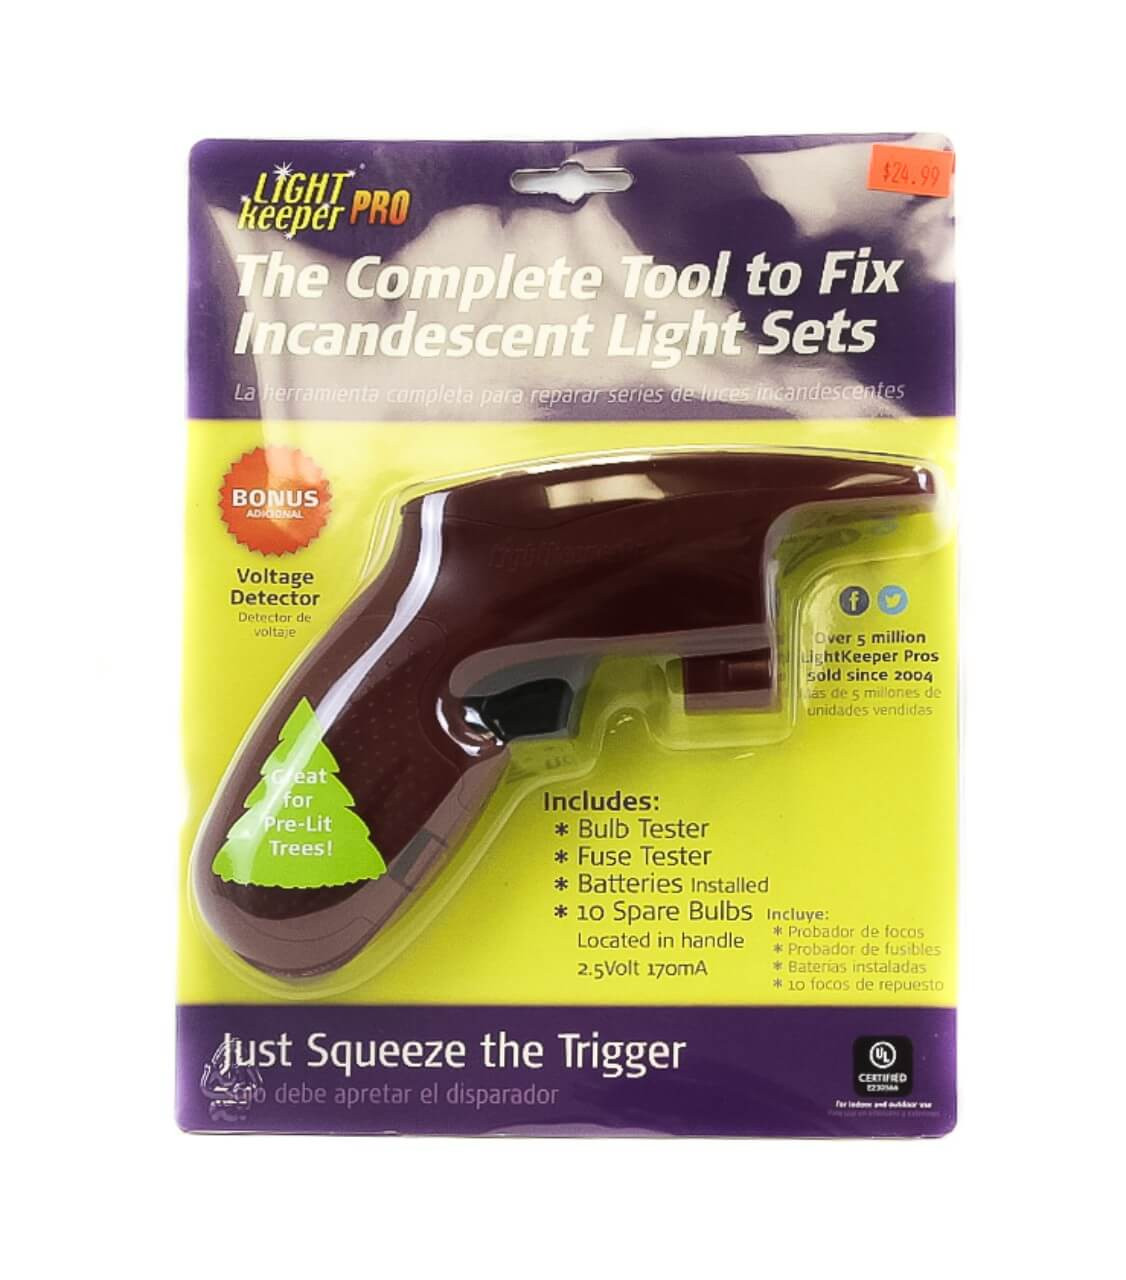 Light Keeper Pro The Complete Tool to Fix Incandescent Light Sets Opened Box